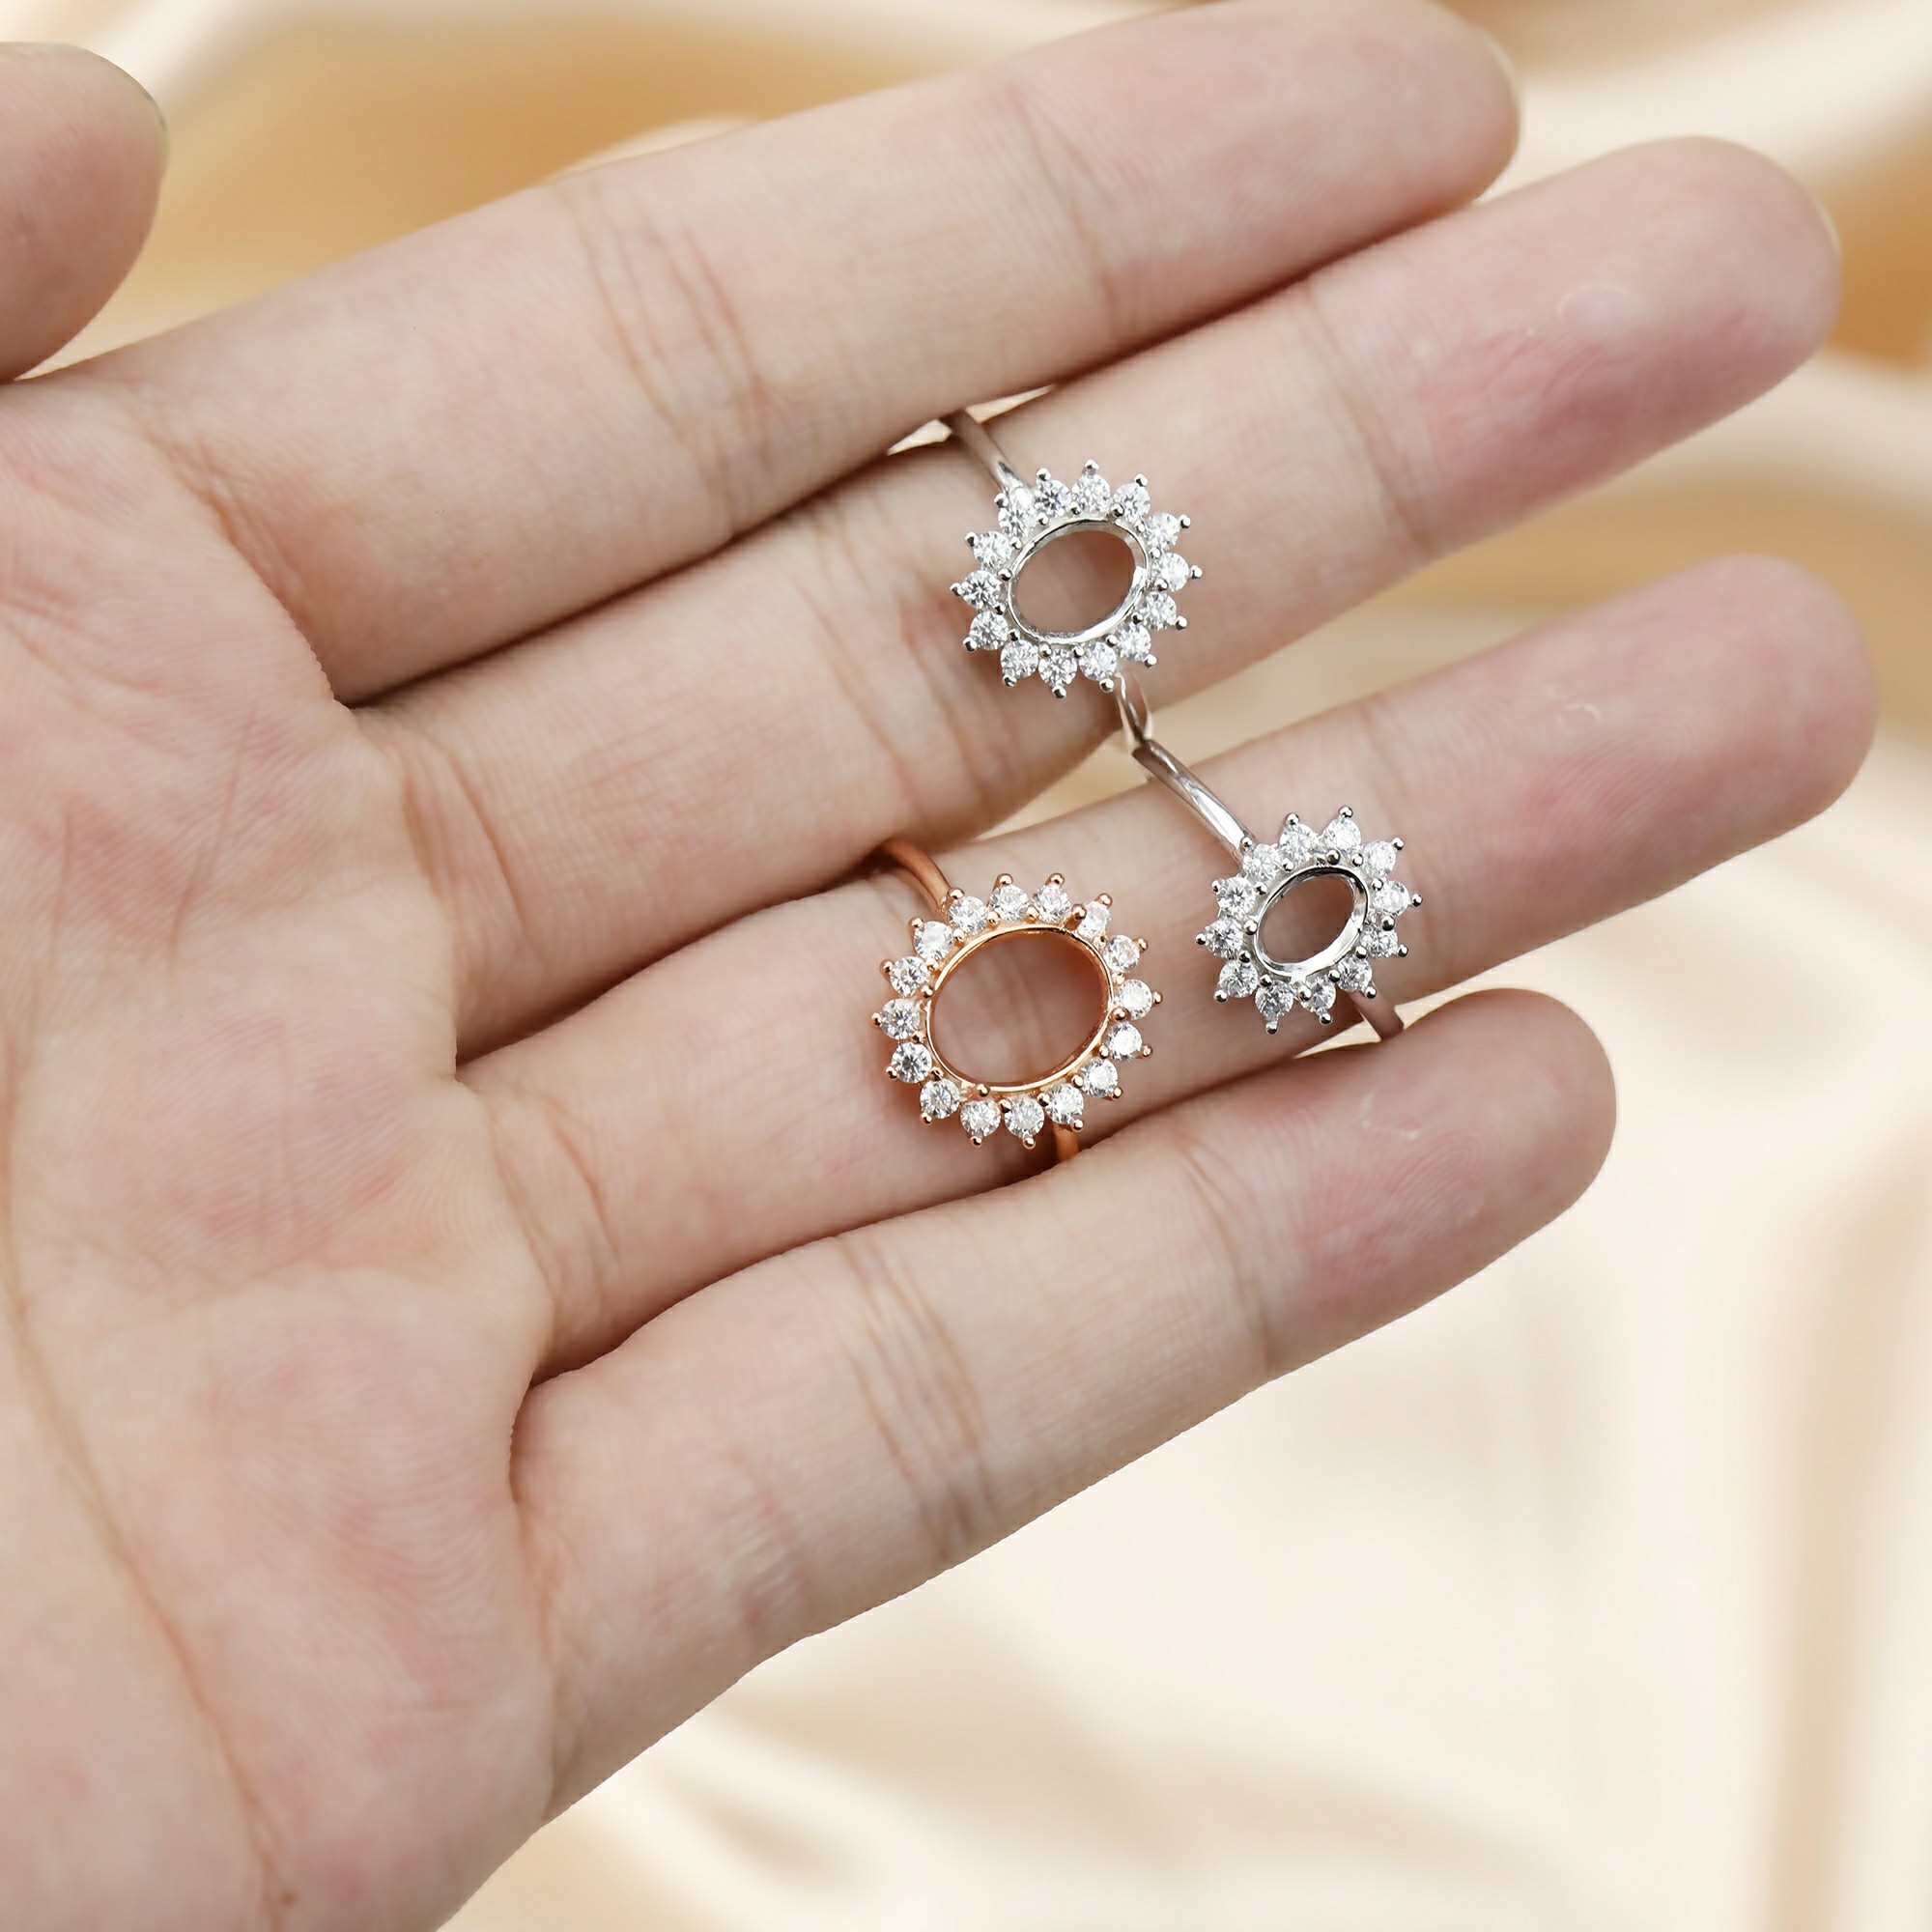 1Pcs Multiple Size Rose Gold Silver Oval Gems Cz Stone Prong Setting Solid 925 Sterling Silver Bezel Tray DIY Adjustable Ring Settings 1224004 - Click Image to Close